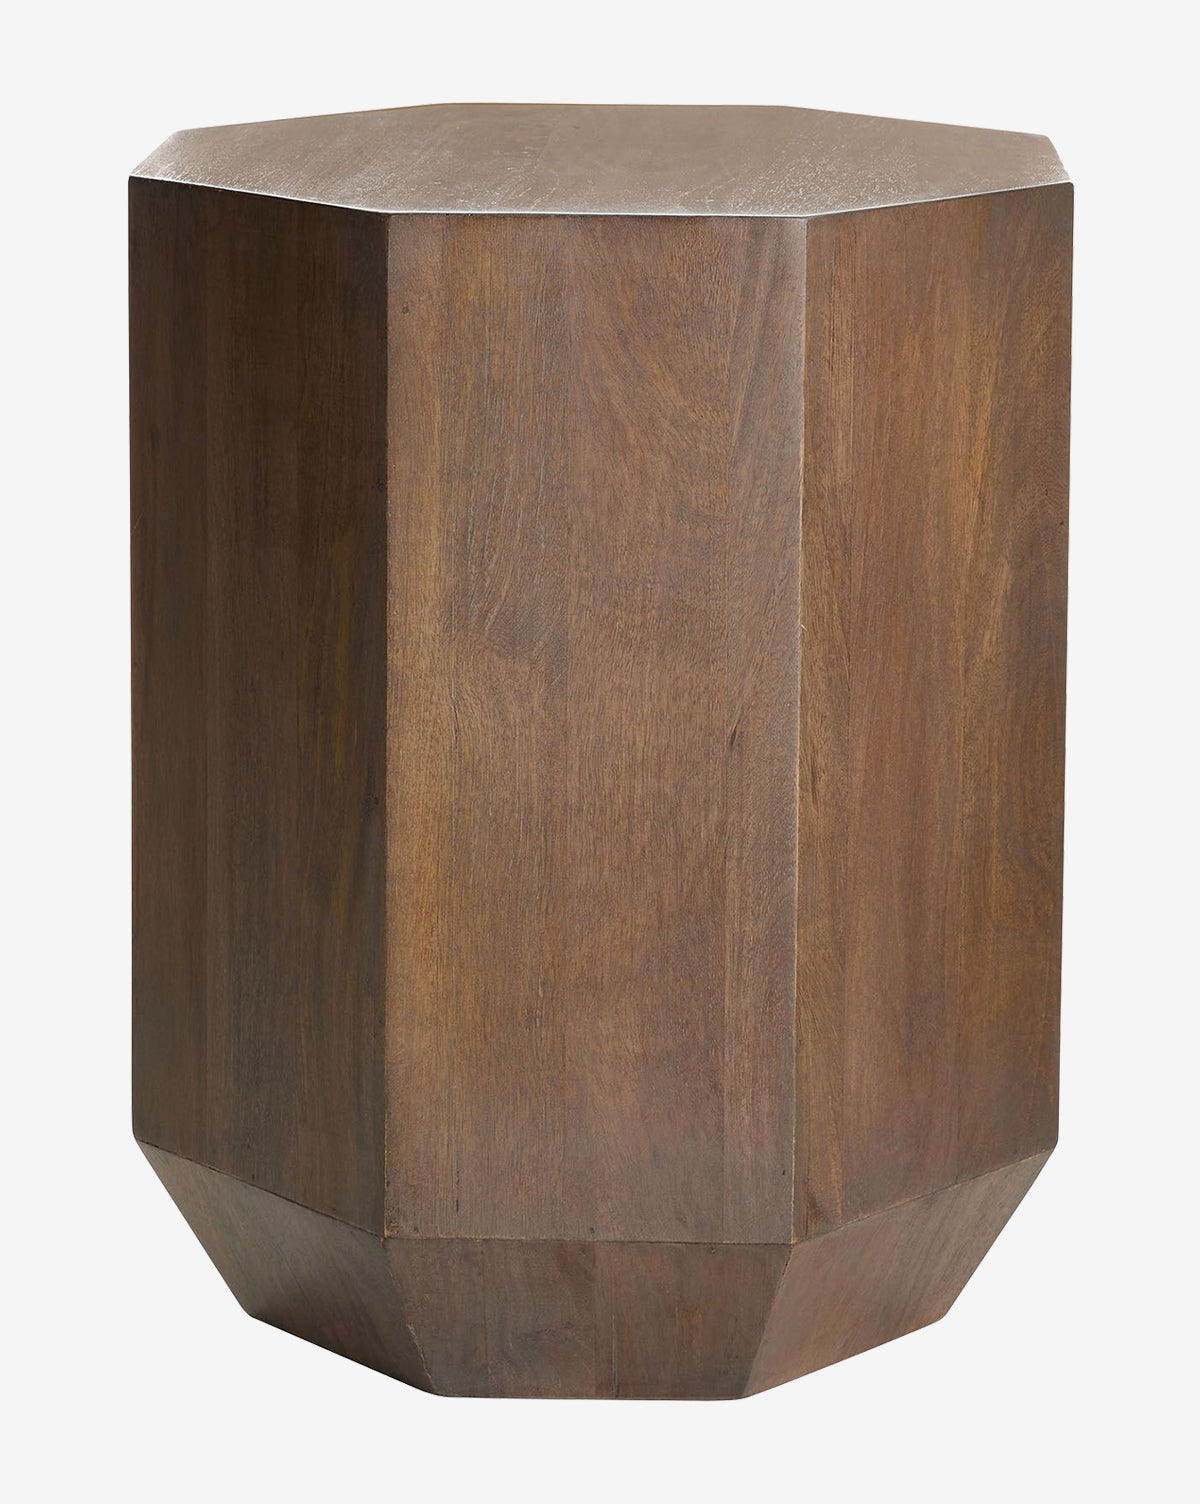 Arteriors, Mikel Side Table